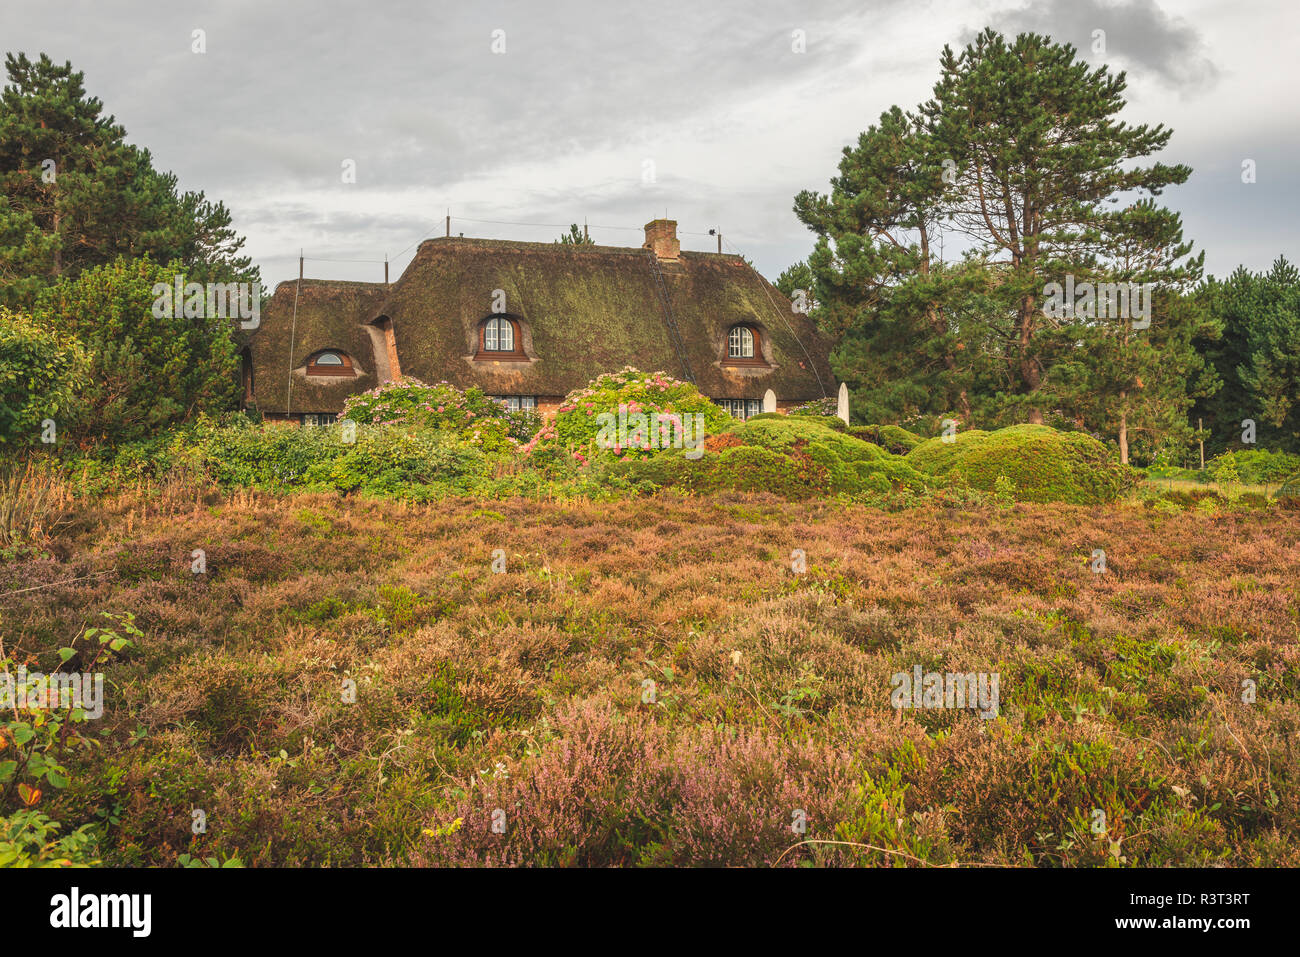 Germany, Schleswig-Holstein, Sylt, thatched-roof house in Braderuper Heide Stock Photo